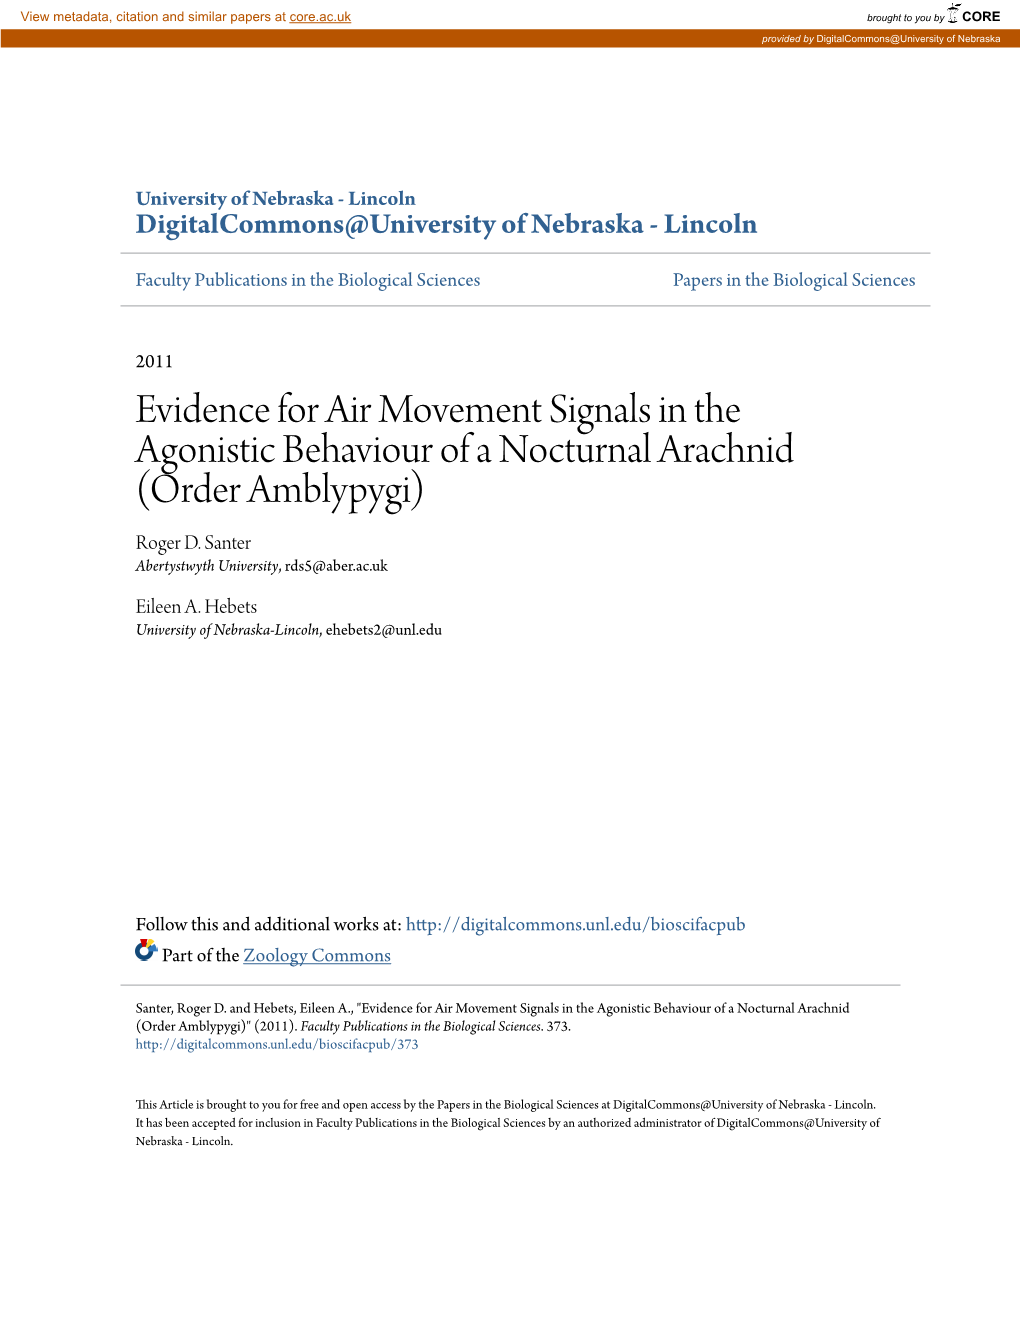 Evidence for Air Movement Signals in the Agonistic Behaviour of a Nocturnal Arachnid (Order Amblypygi) Roger D